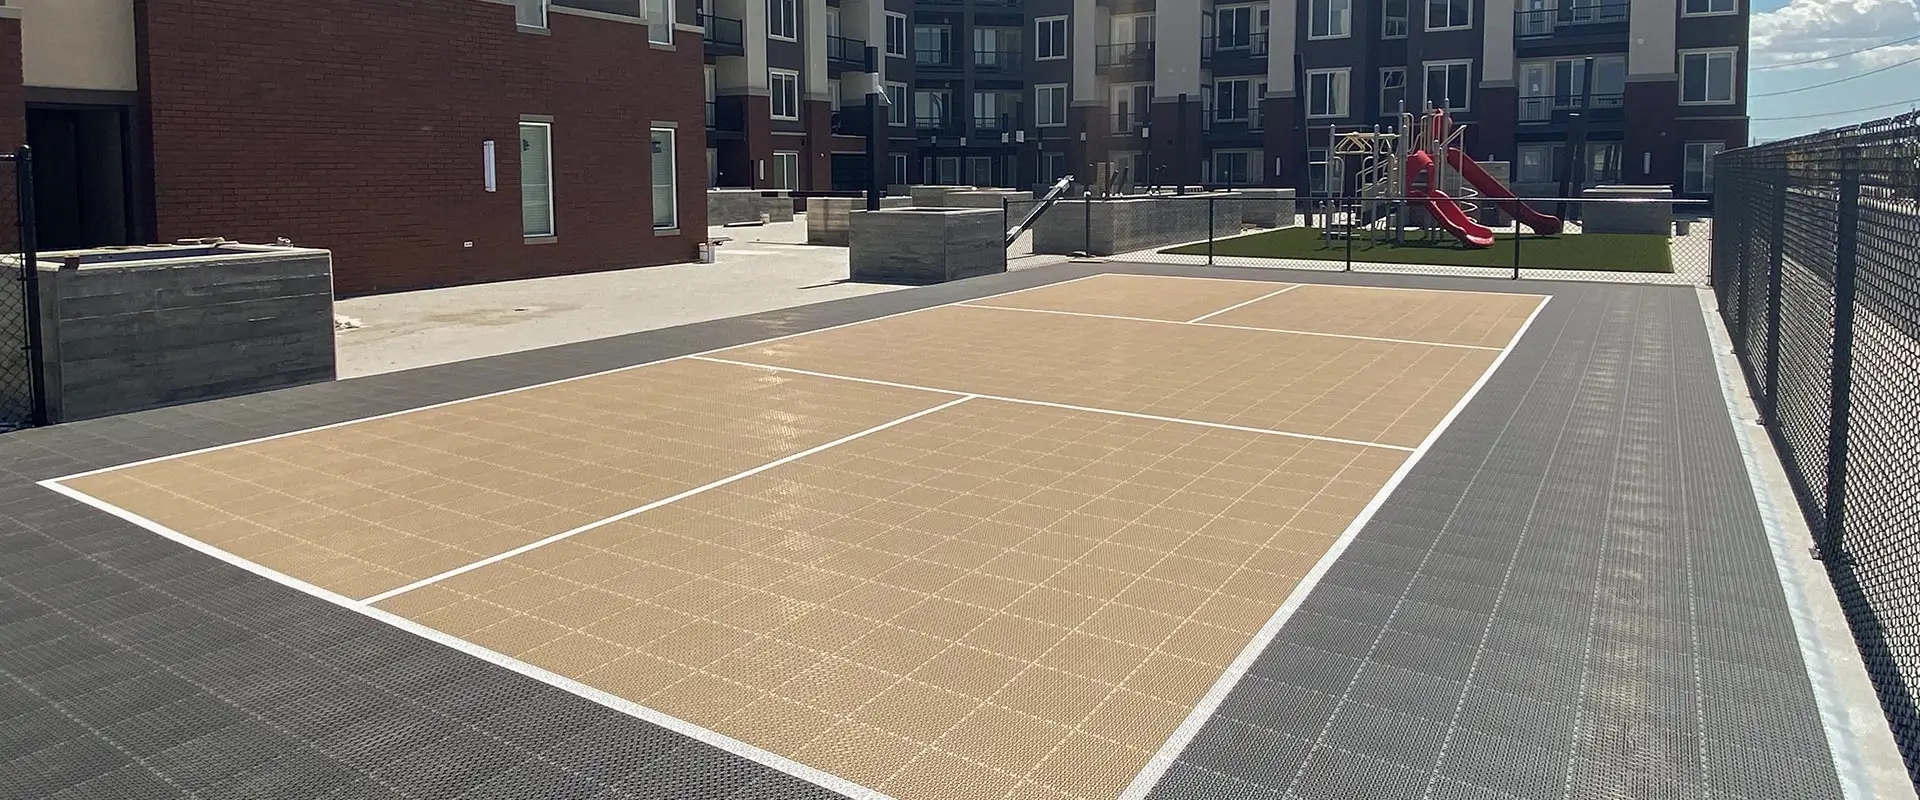 Community pickleball court at a new apartment complex